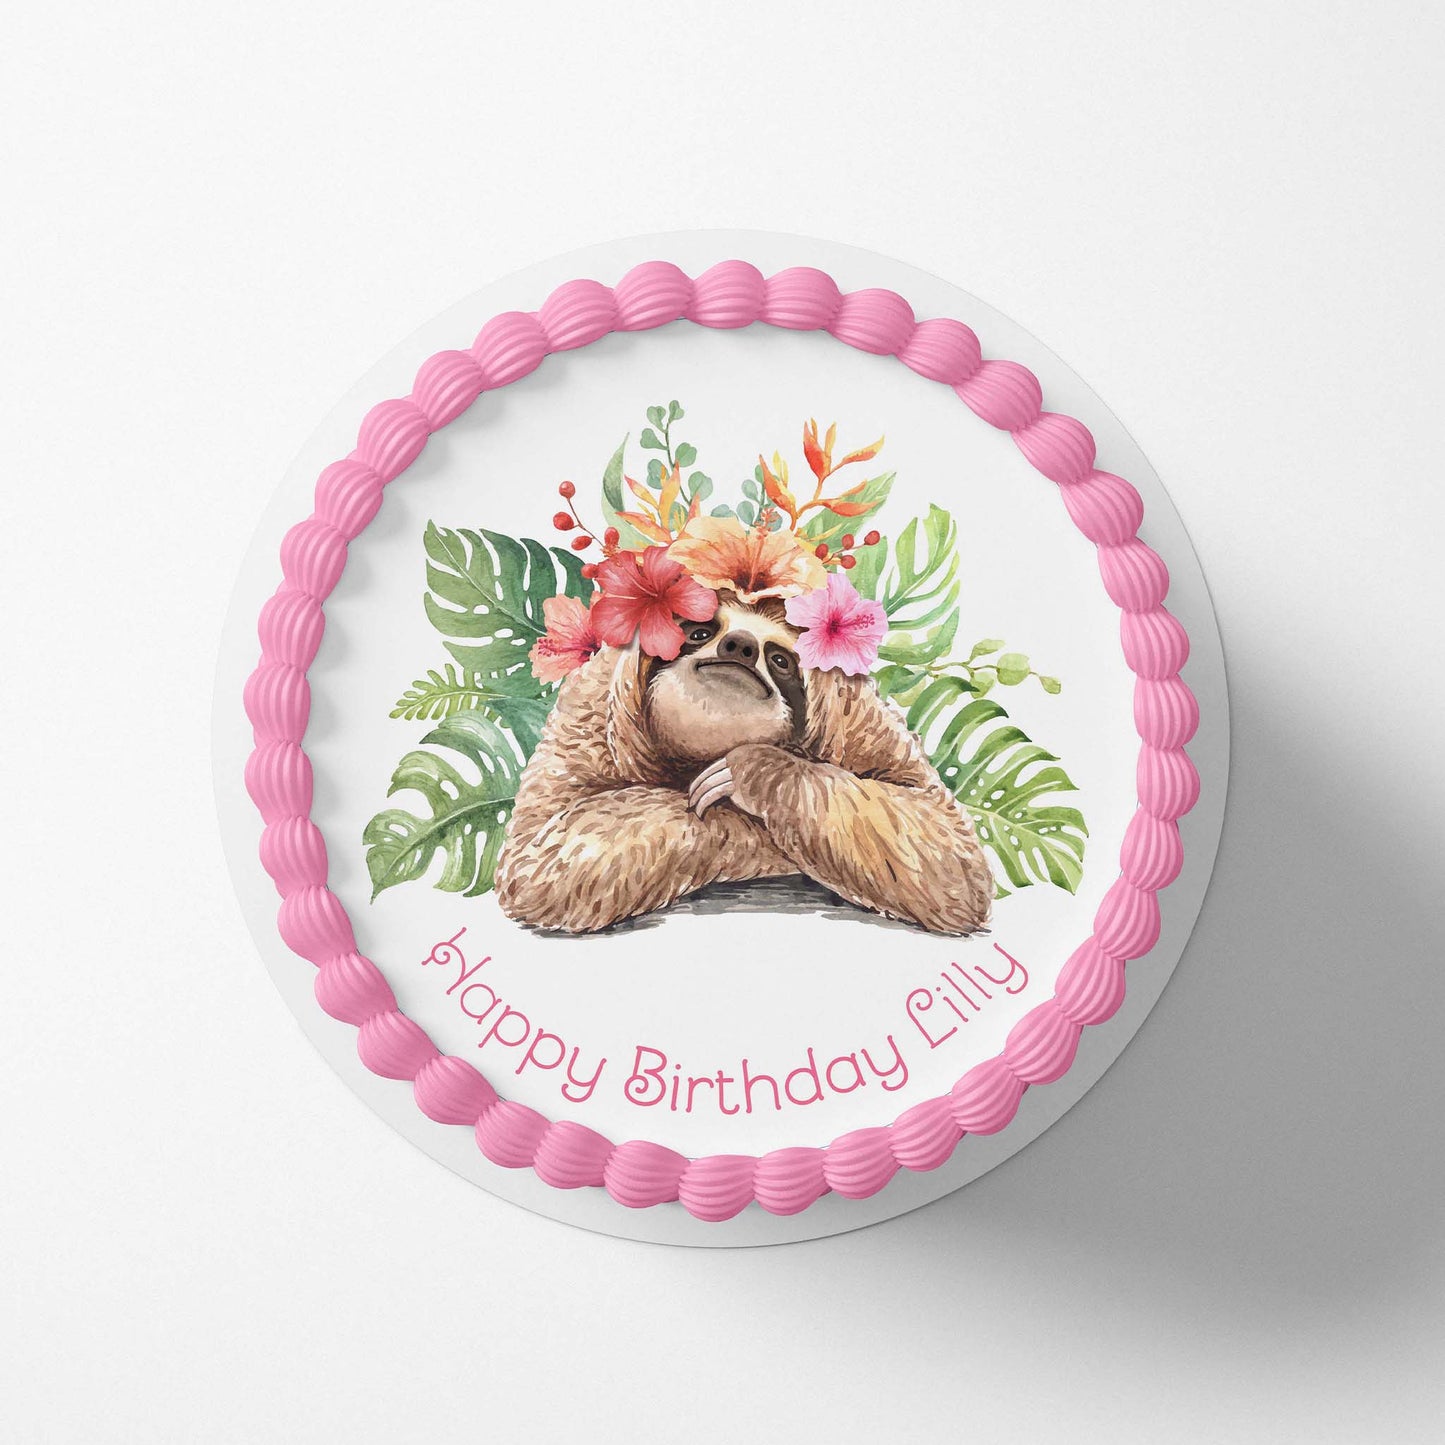 Add this fun design of Sloth with tropical flowers to cakes, cupcakes or any sweet treats. Perfect for a birthday or a special occasion.